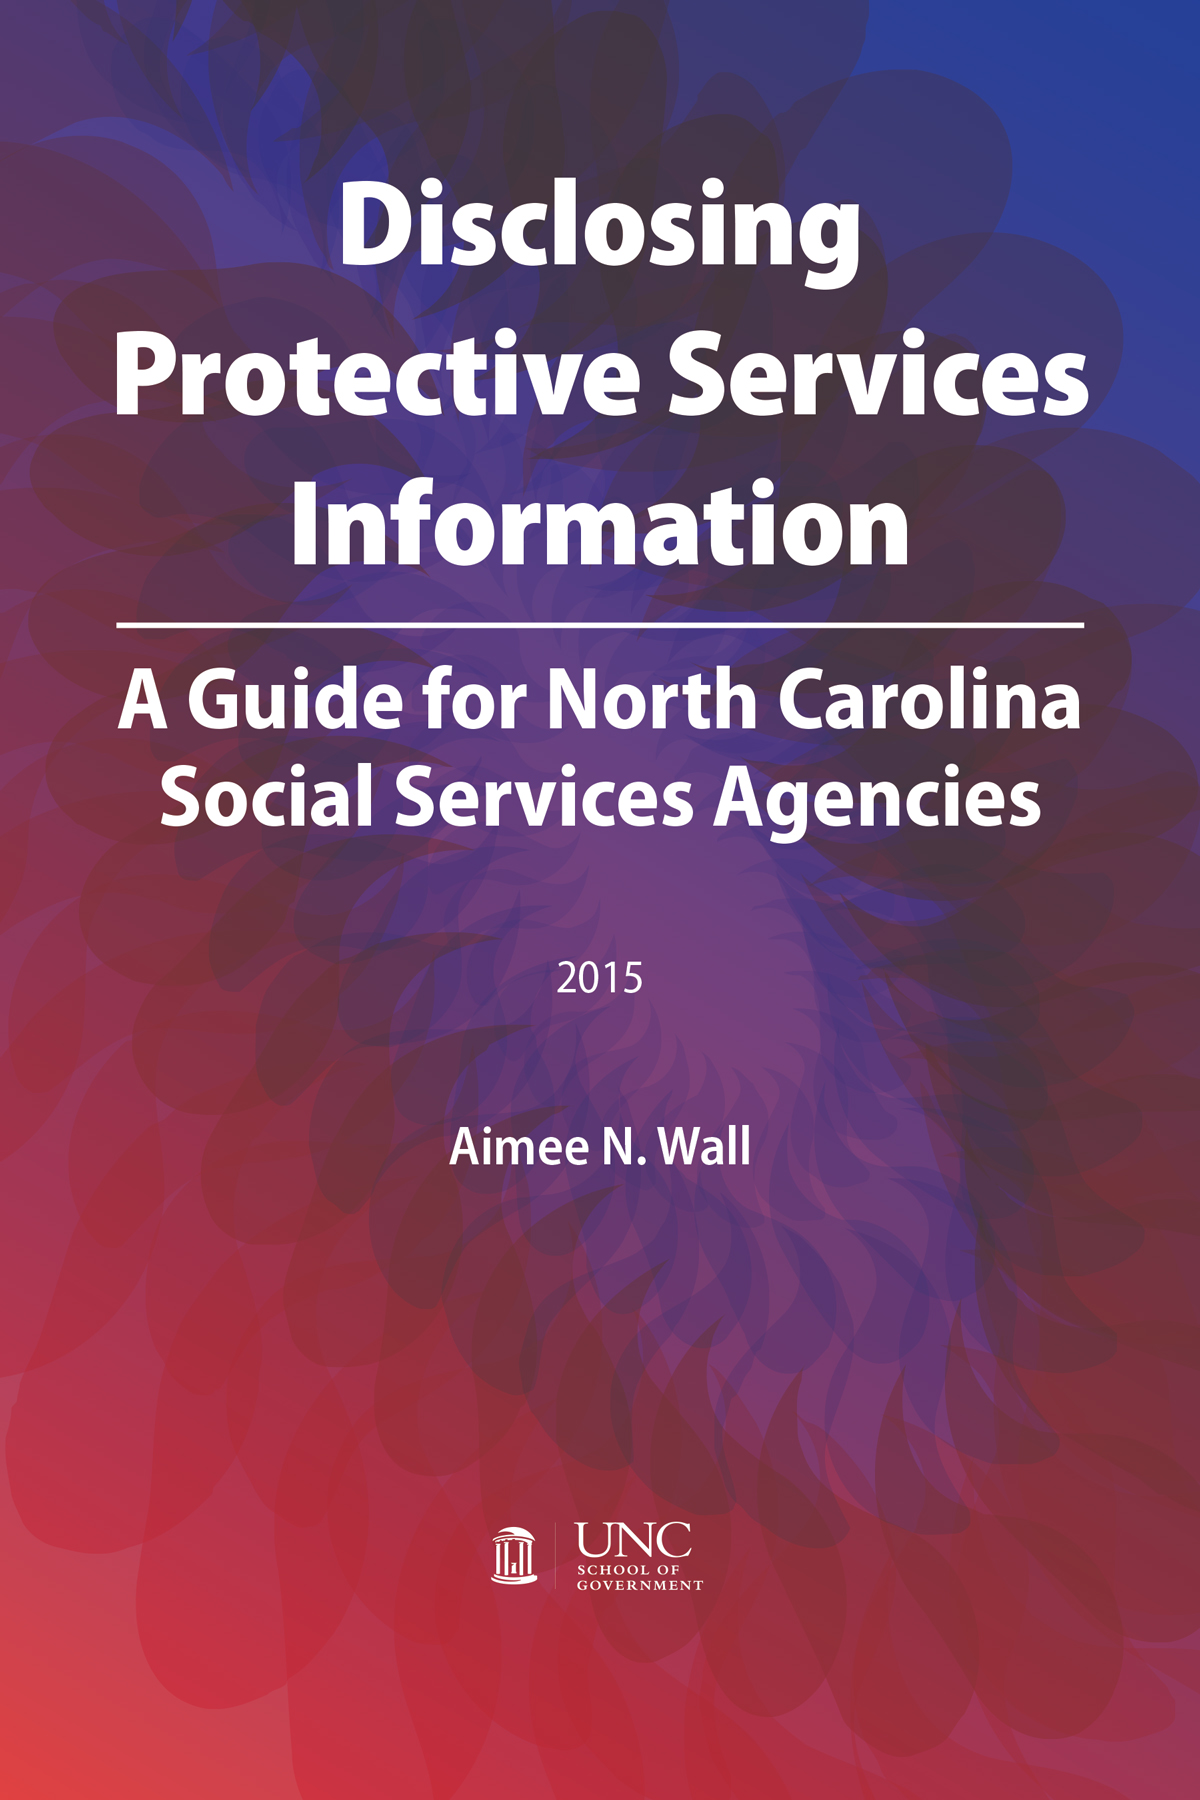 Disclosing Protective Services Information: A Guide for North Carolina Social Services Agencies, 2015, Aimee N. Wall